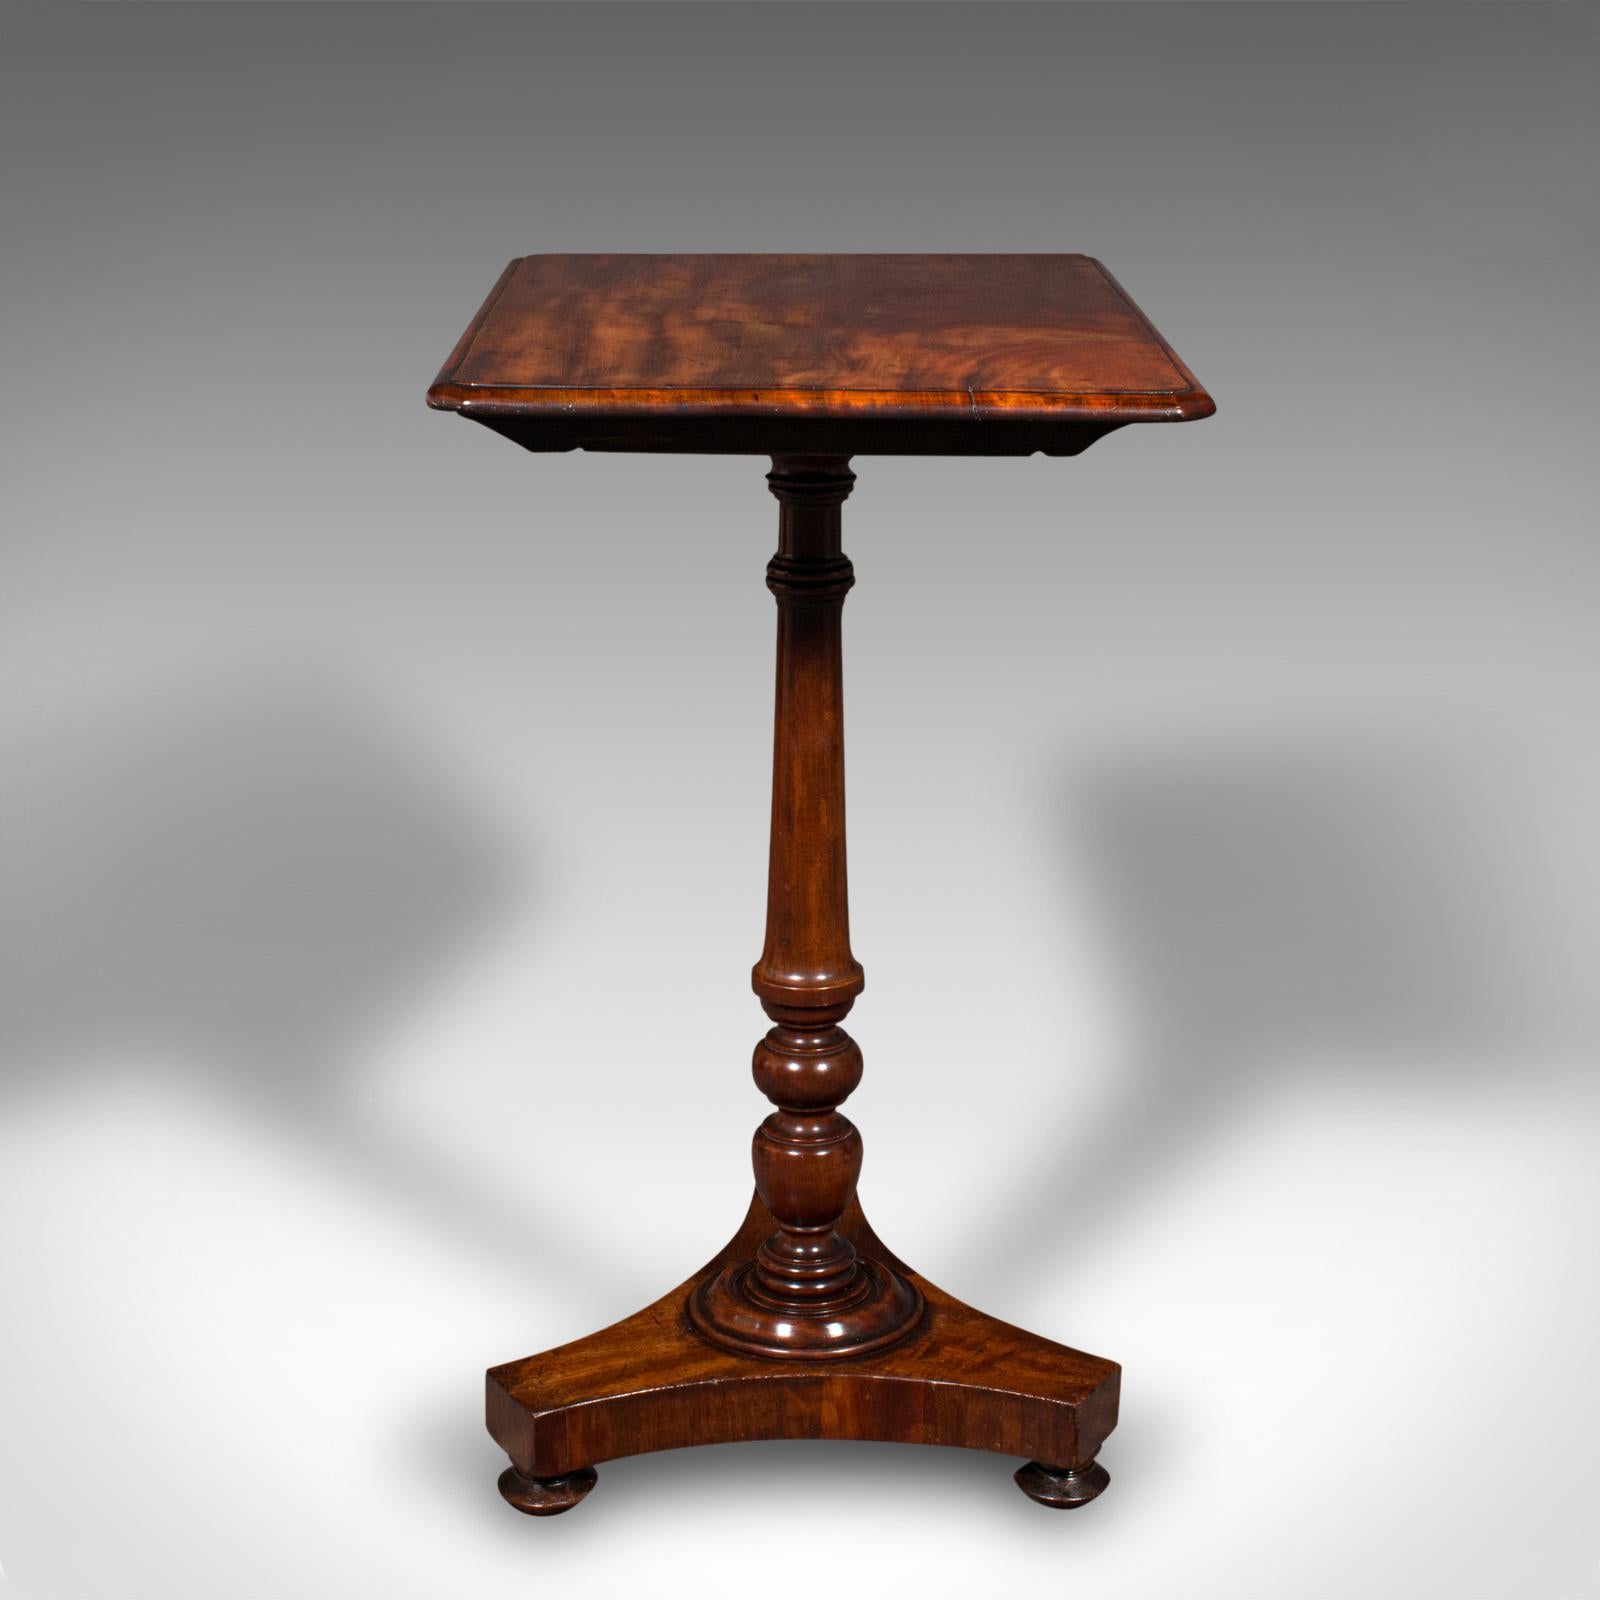 British Antique Tilting Lamp Table, English, Flame, Occasional, Side, Regency circa 1820 For Sale